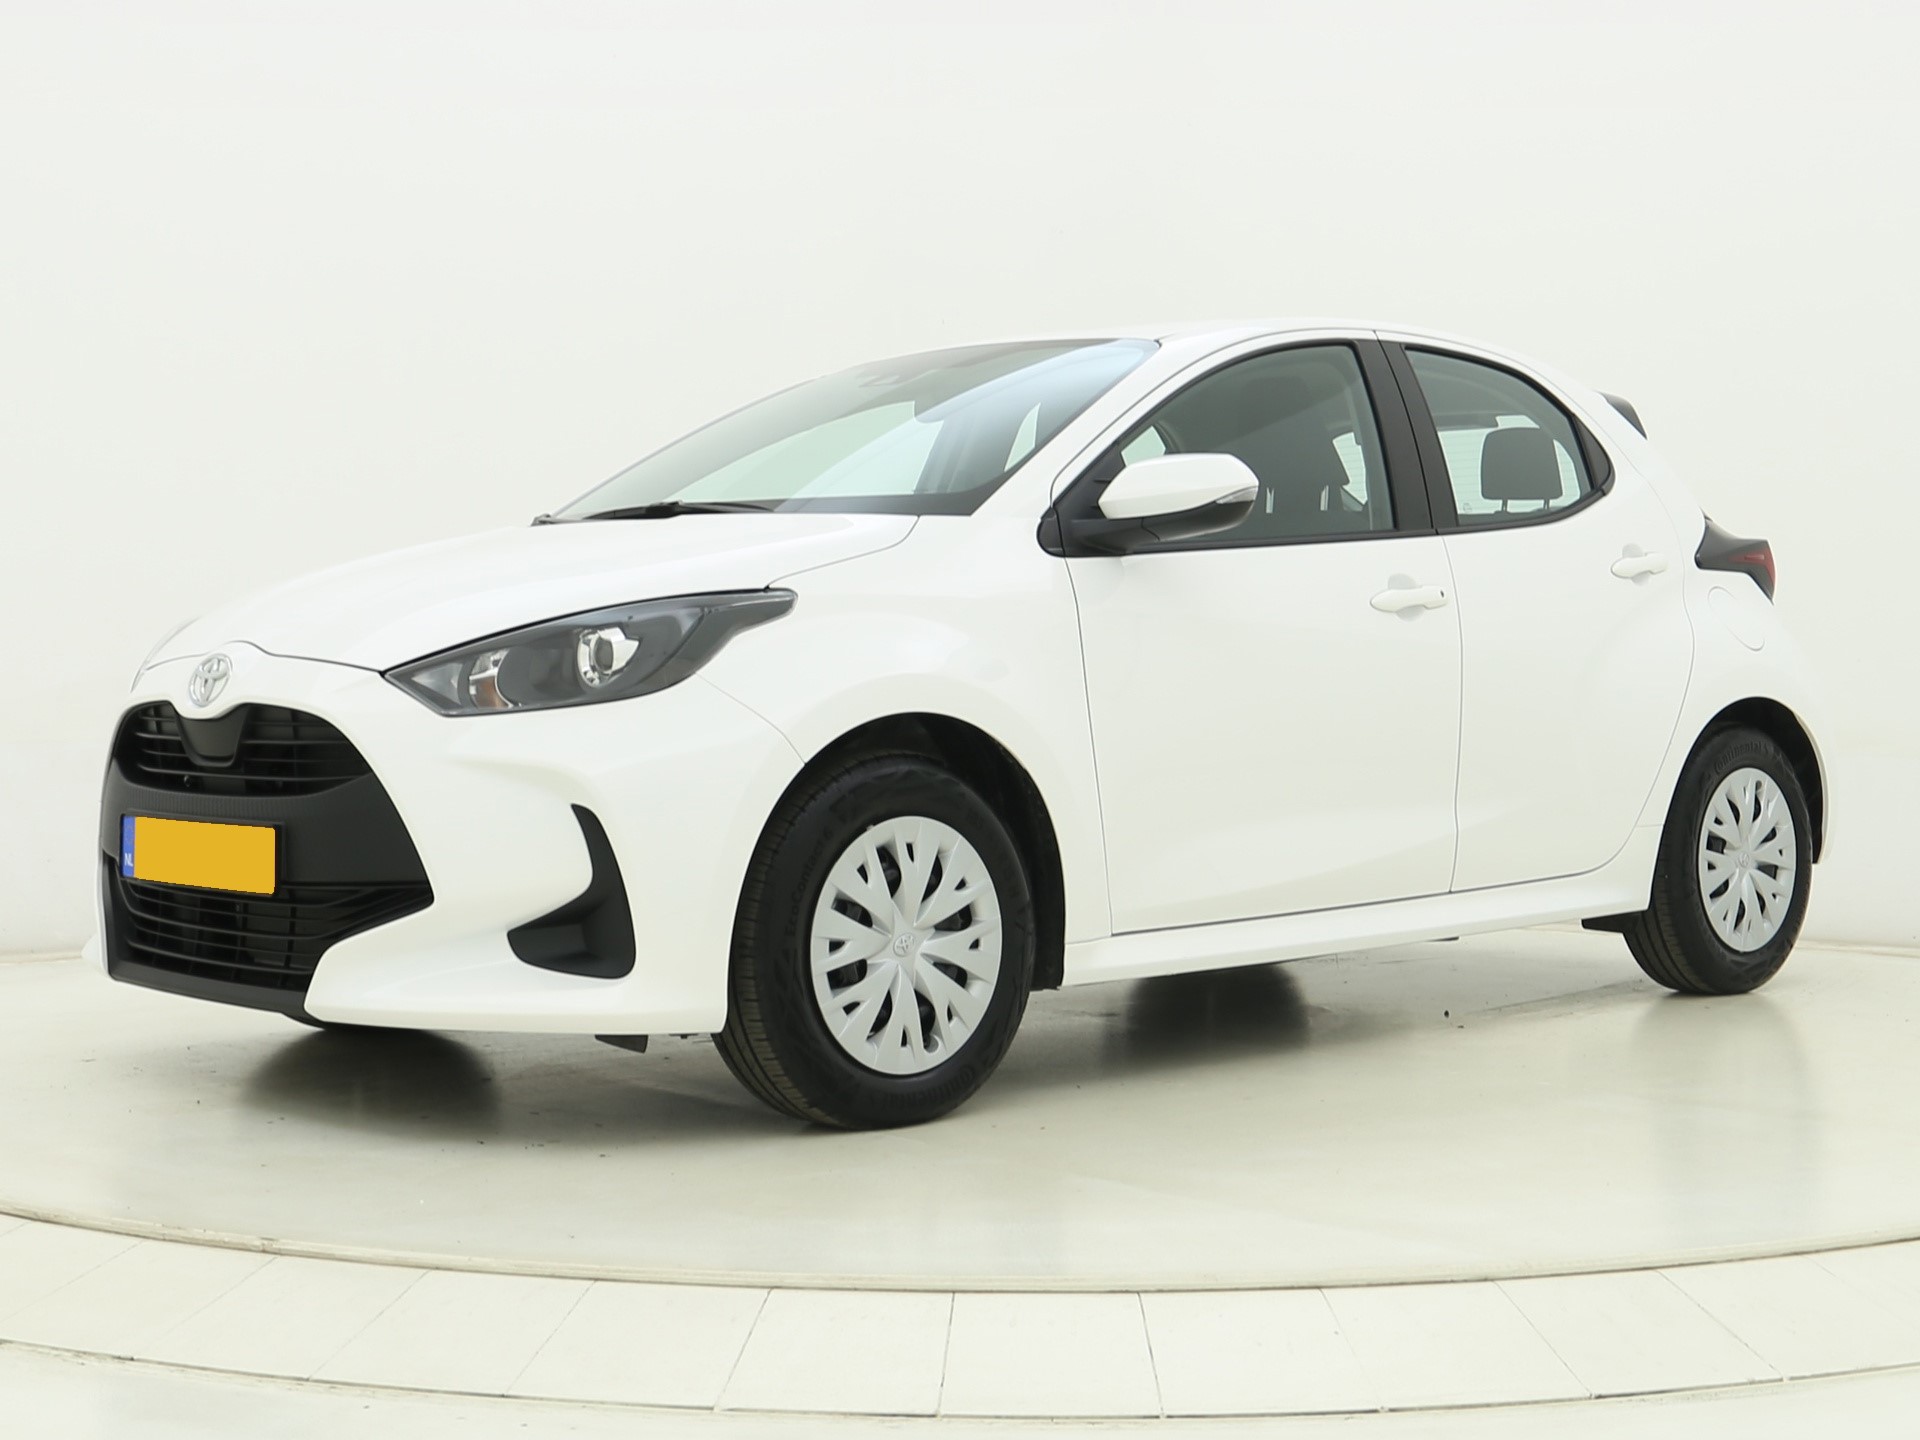 Primary Image toyota and yaris